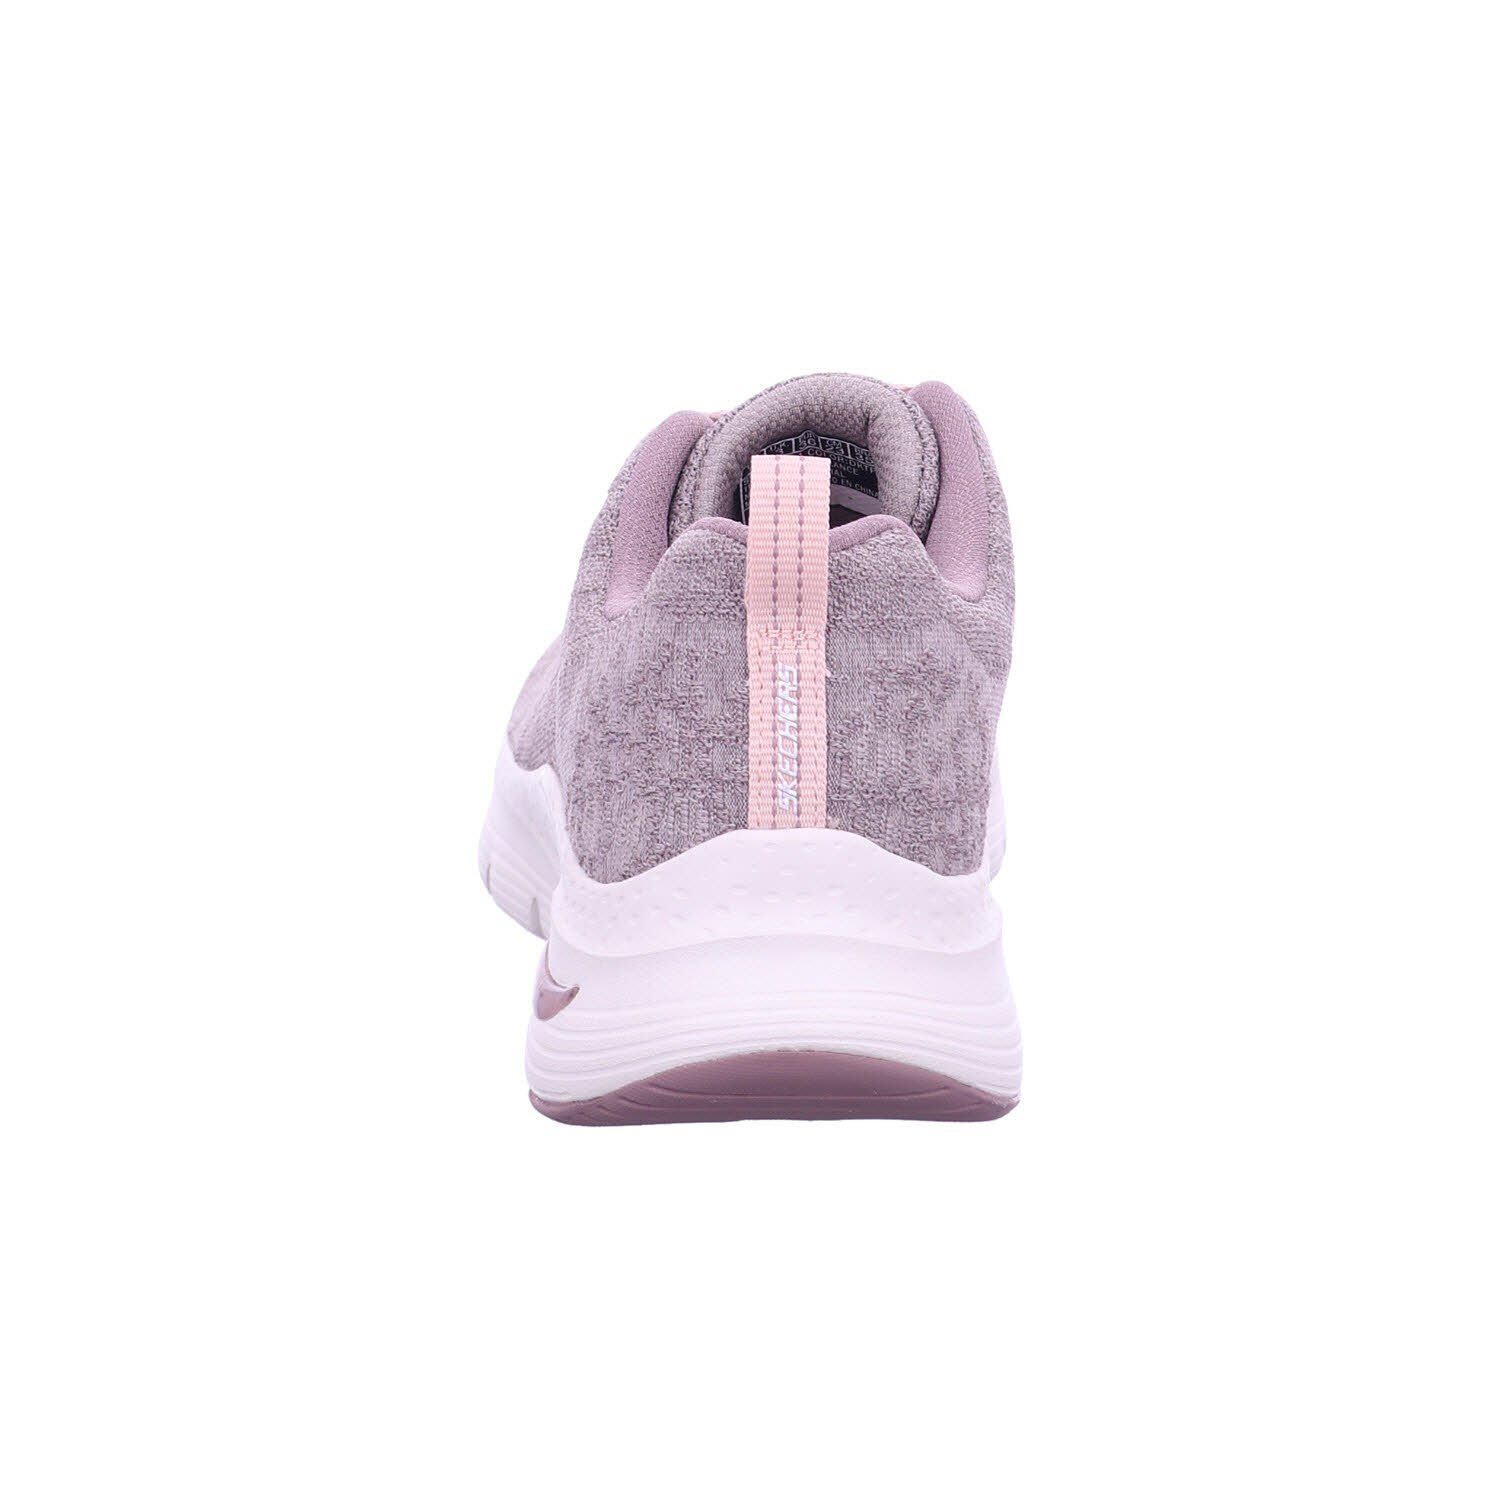 - dark ARCH WAVE (2-tlg) FIT COMFY Skechers Sneaker taupe